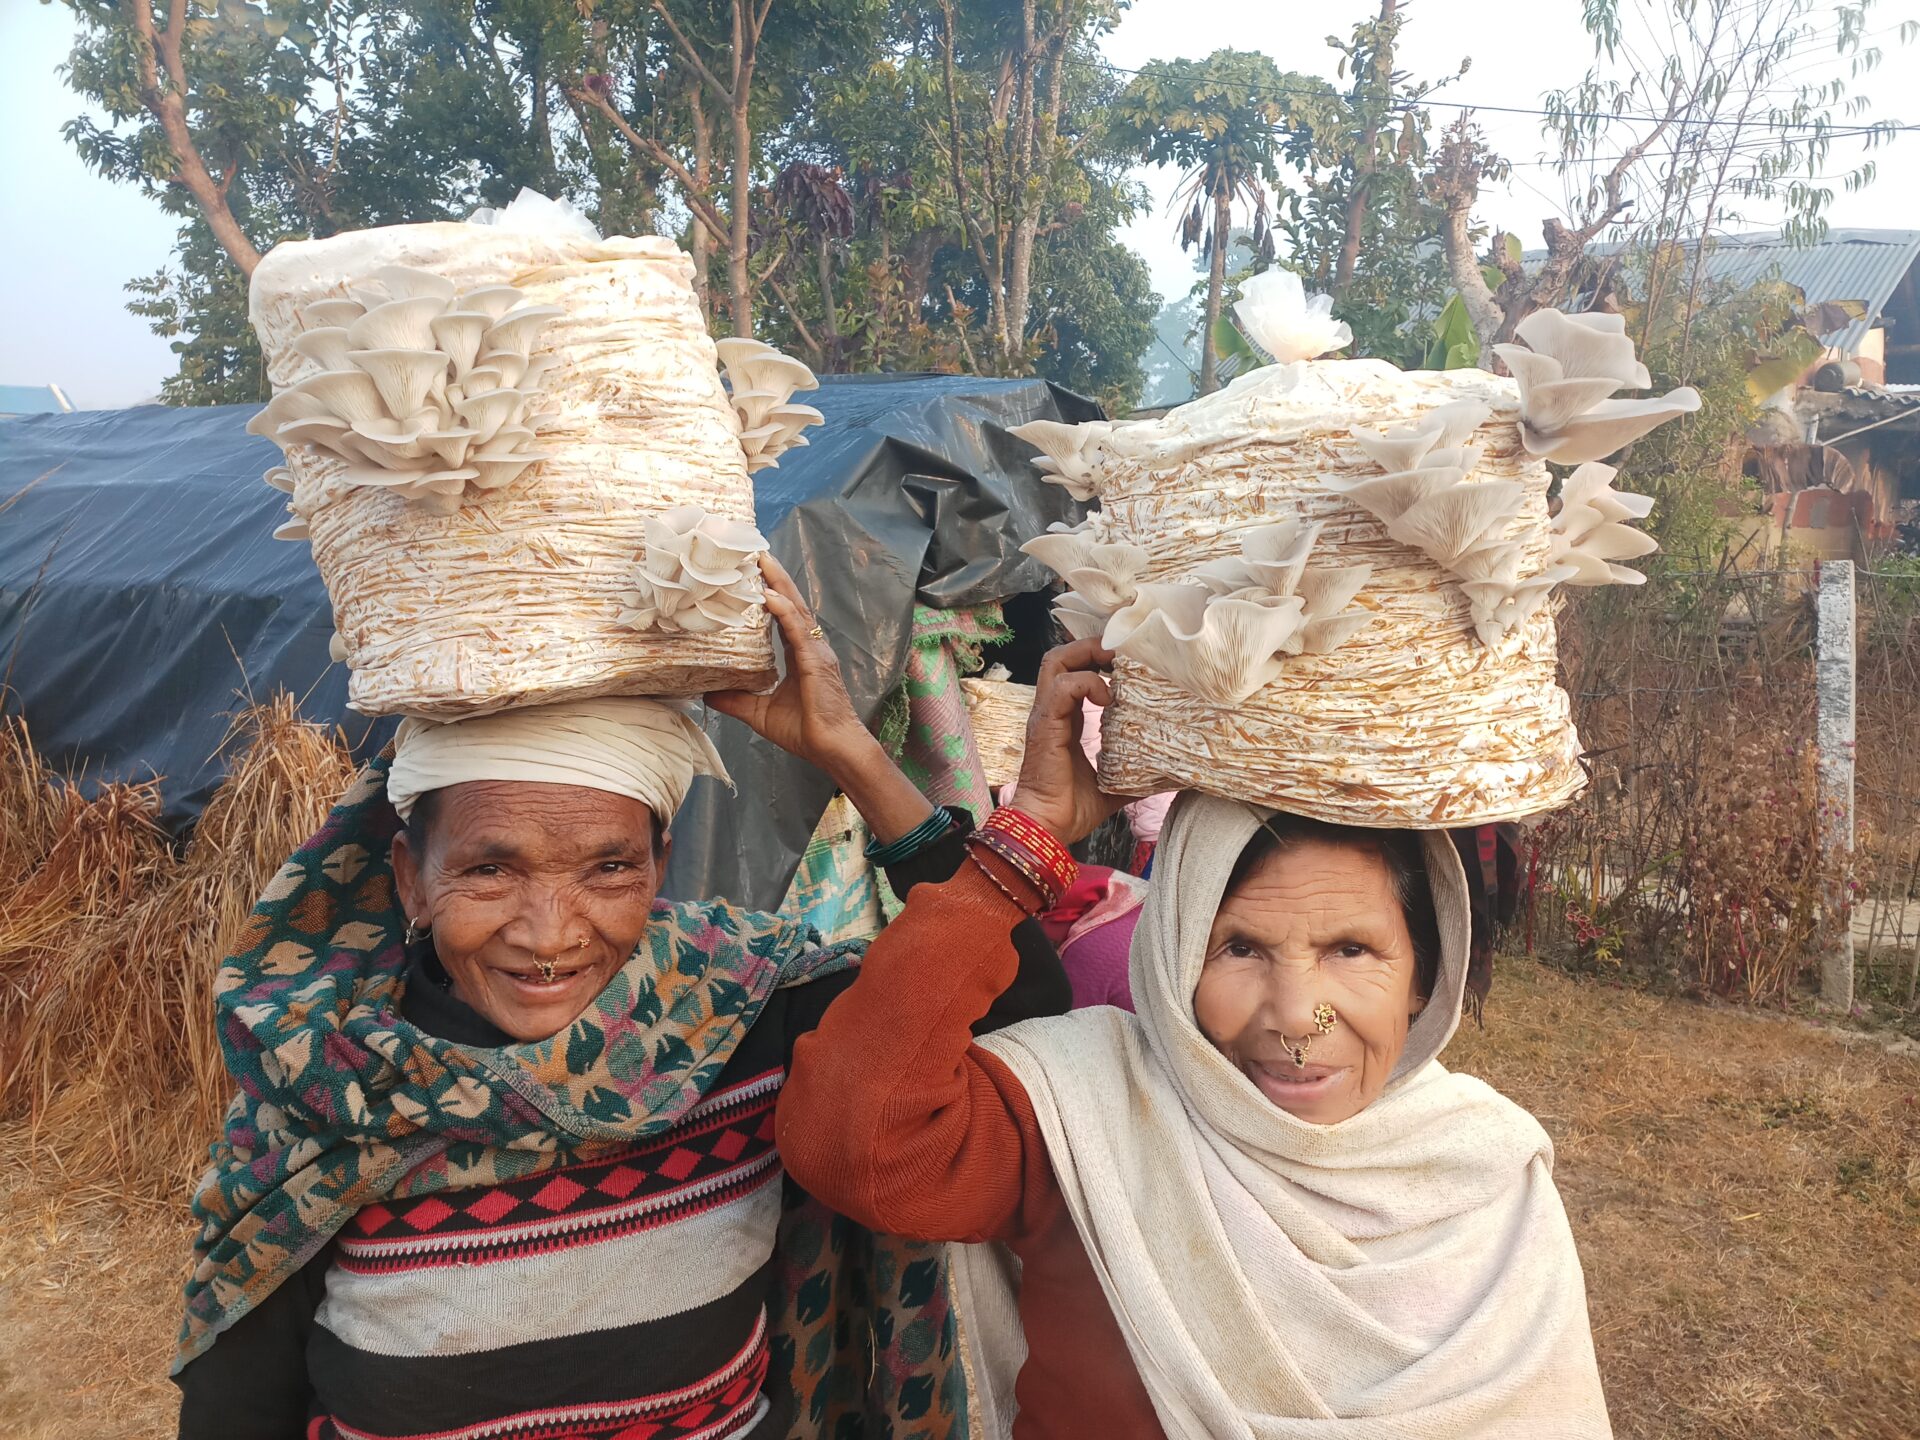 Two women are carrying food on their heads.